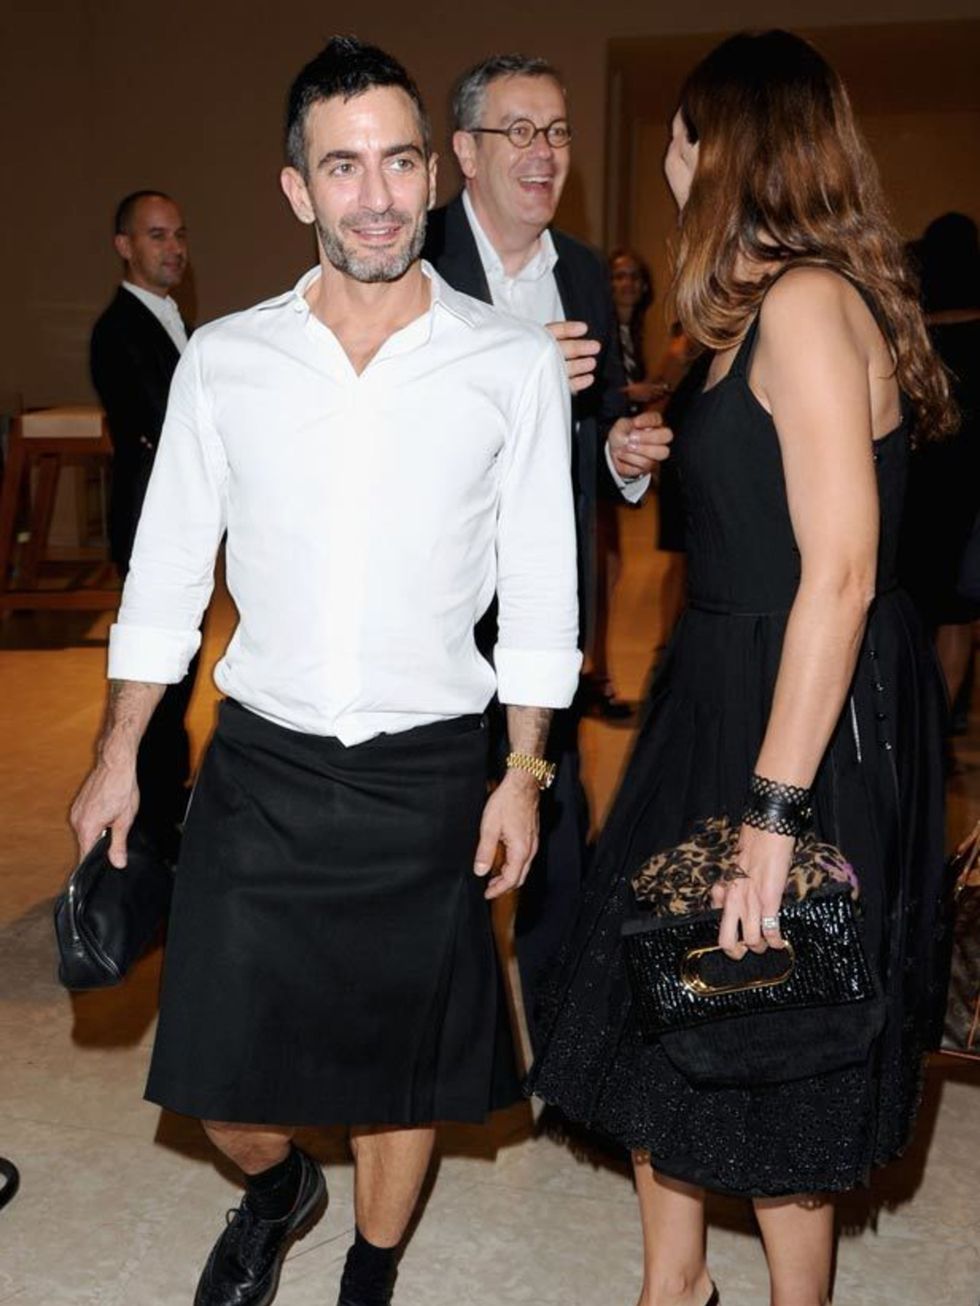 <p><a href="http://www.elleuk.com/catwalk/collections/marc-jacobs/">Marc Jacobs</a> attended Louis Vuitton's The Art of Fashion Exhibition Opening at Milan Fashion Week in his signature kilt, 21 September 2011</p>